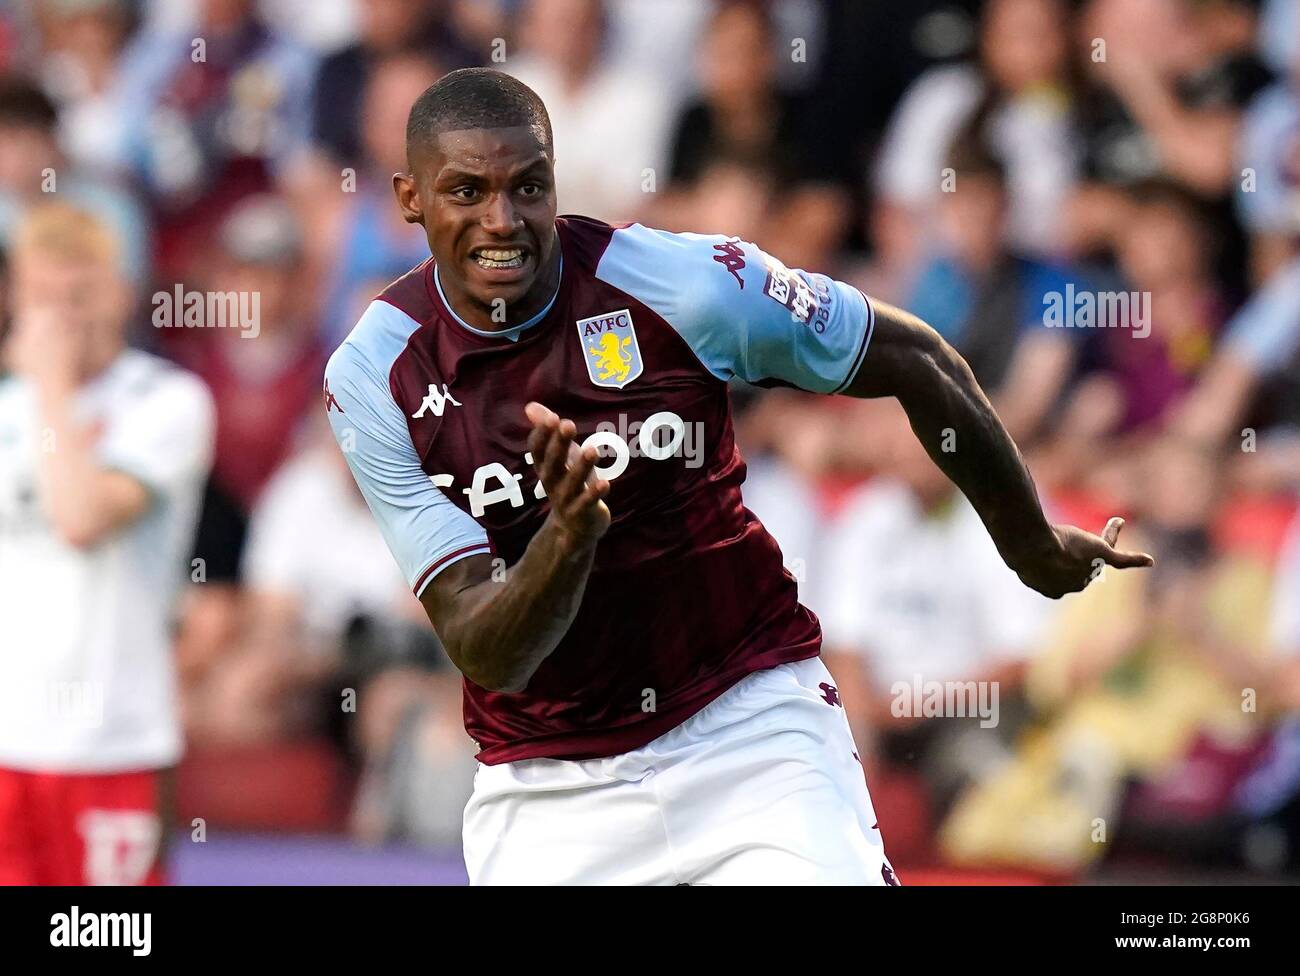 Walsall, England, 21st July 2021. Wesley of Aston Villa during the Pre Season Friendly match at the Banks's Stadium, Walsall. Picture credit should read: Andrew Yates / Sportimage Stock Photo